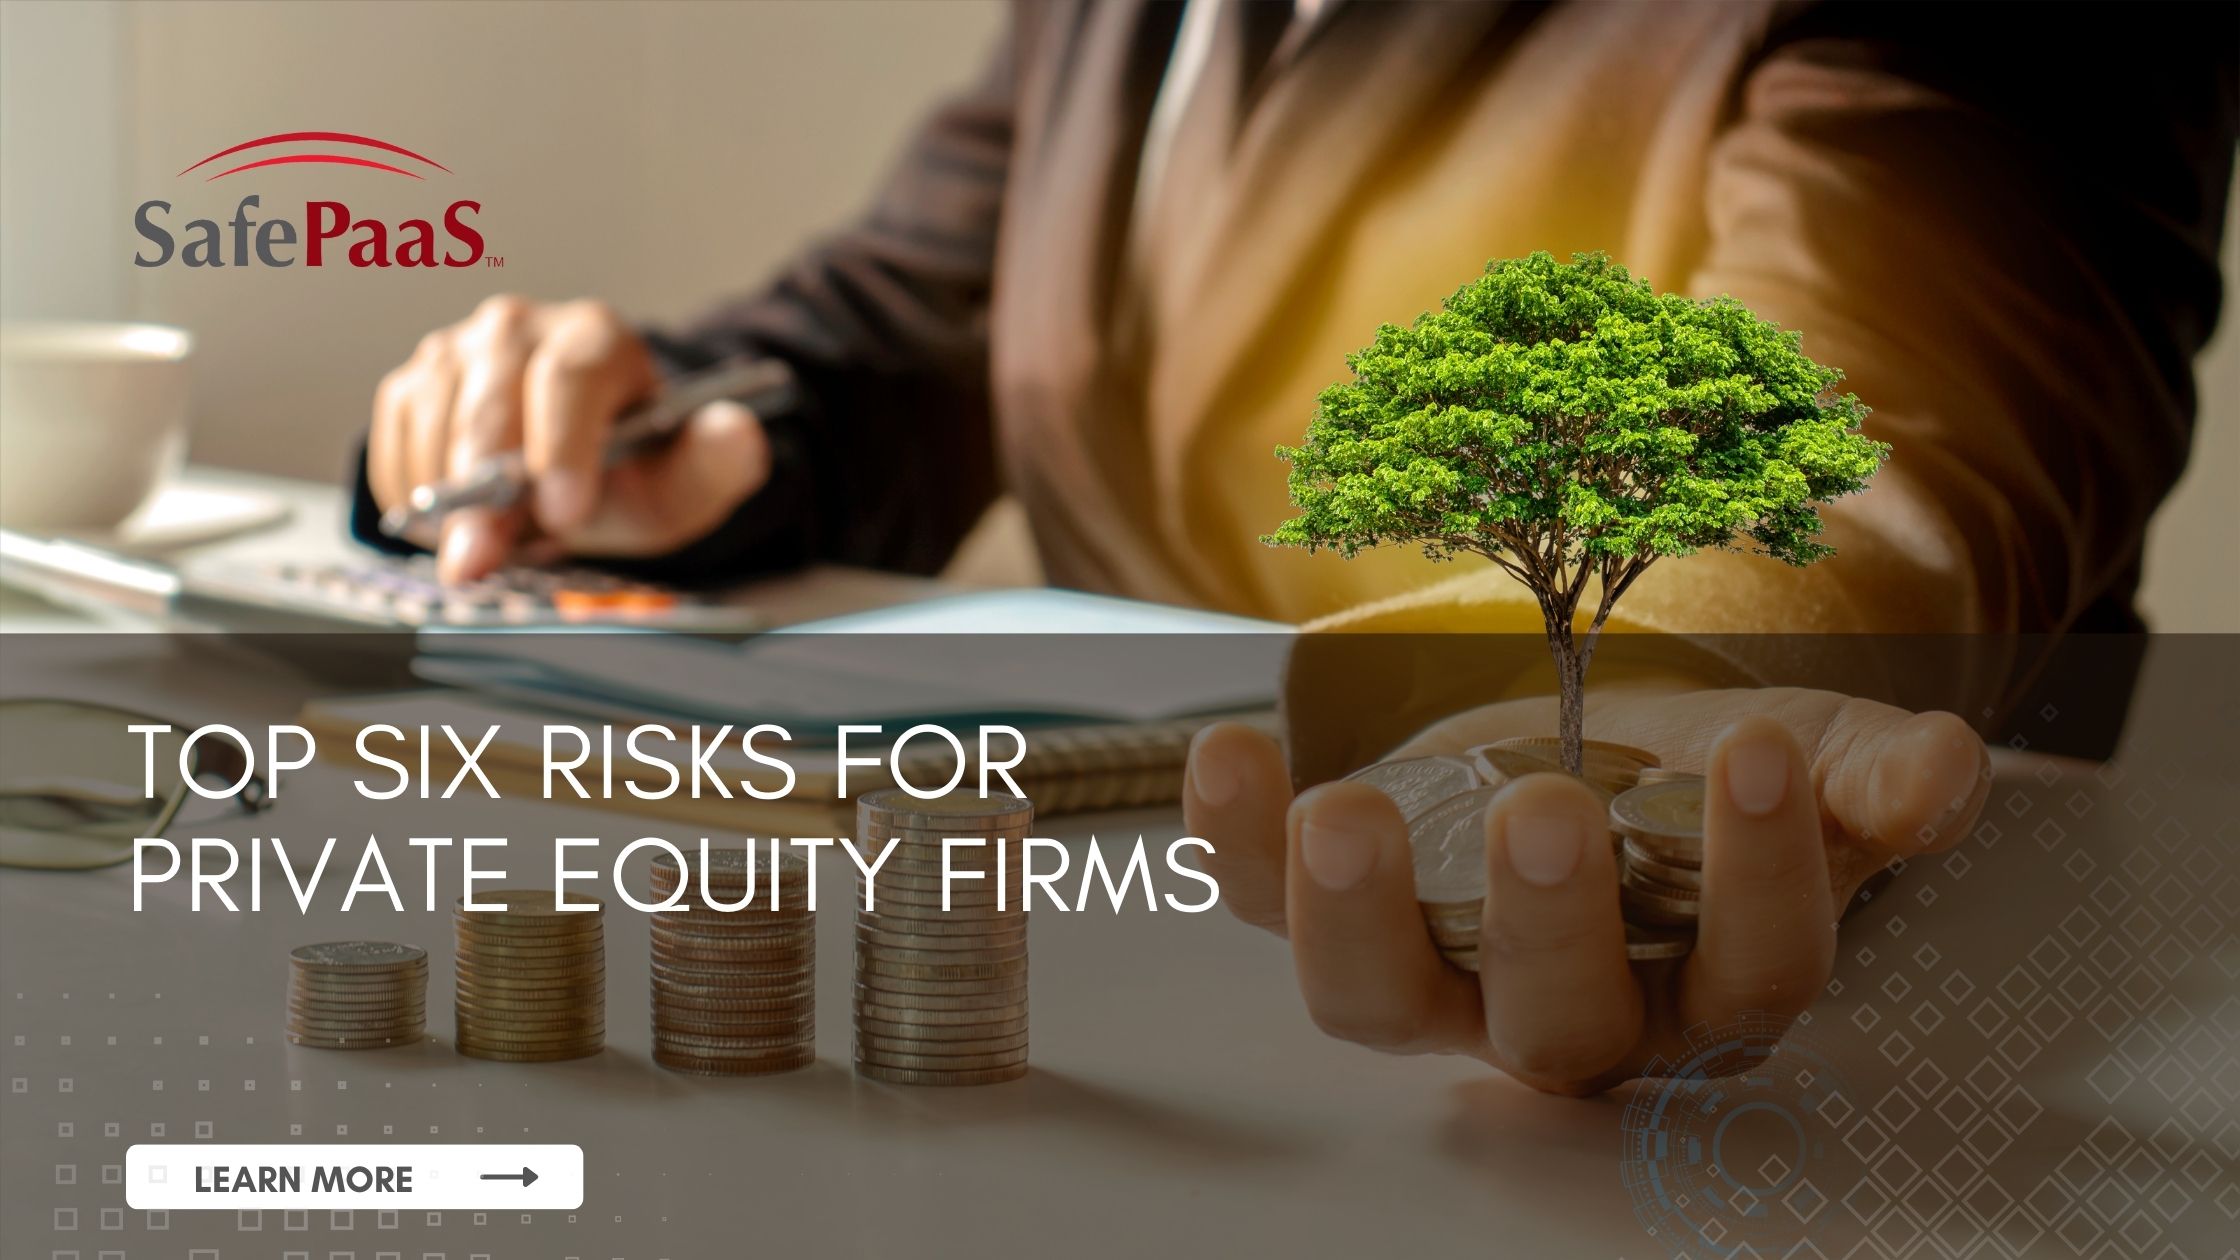 Top risks private equity firms